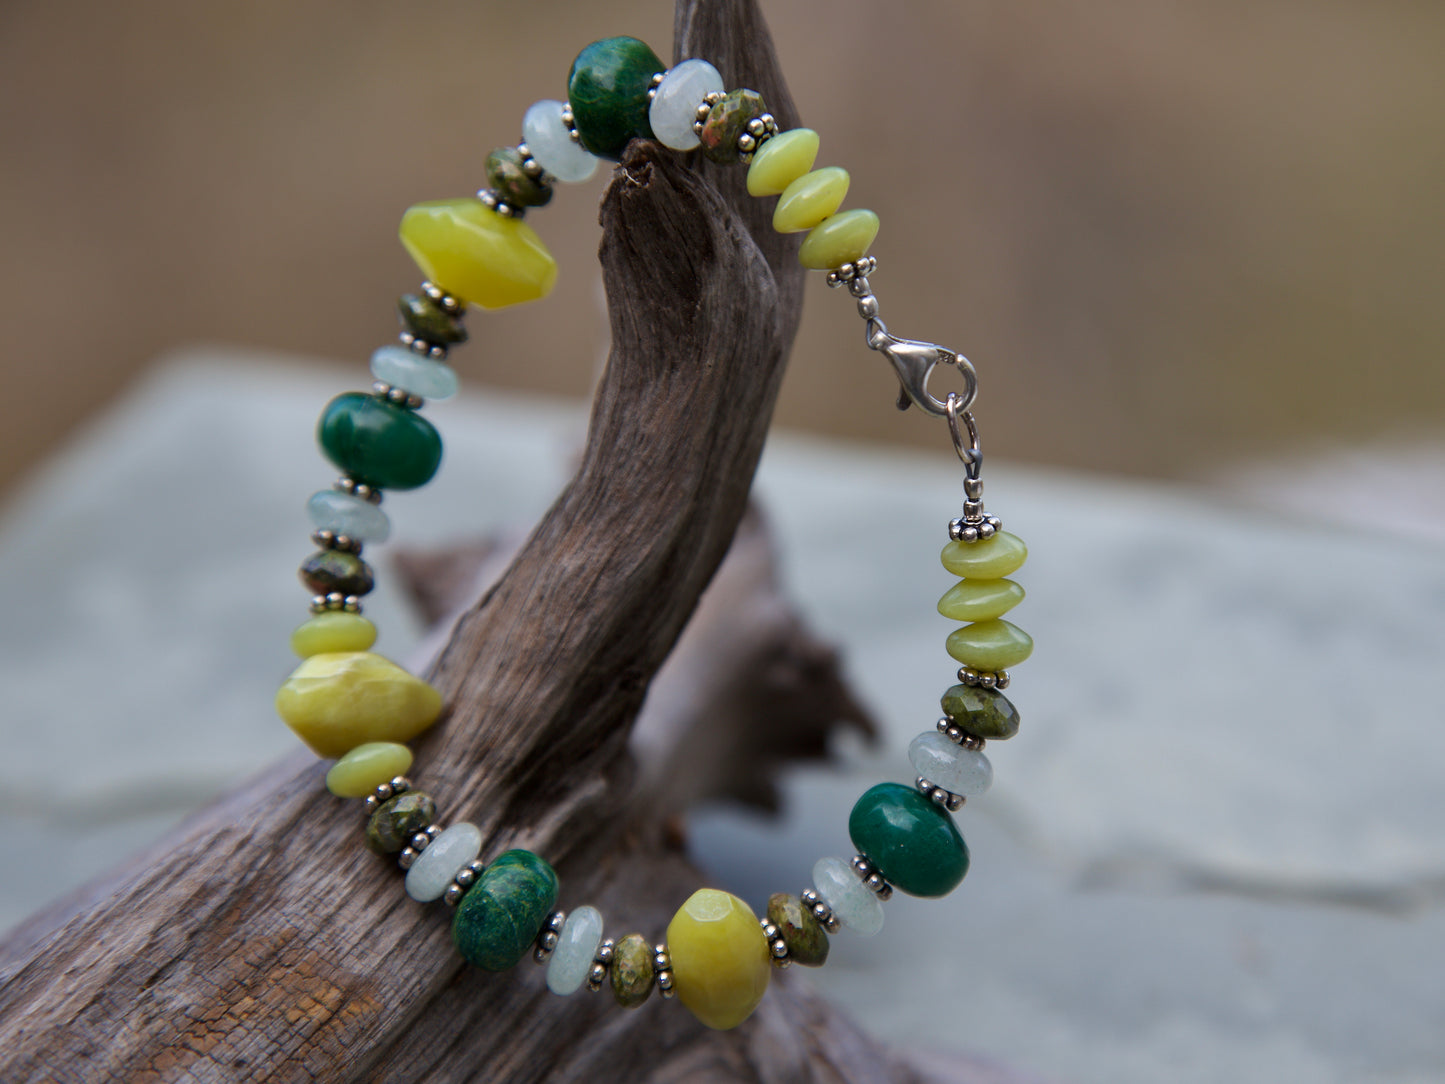 Shades of Green Stone and Sterling Silver Bracelet to fit a 7.75" wrist